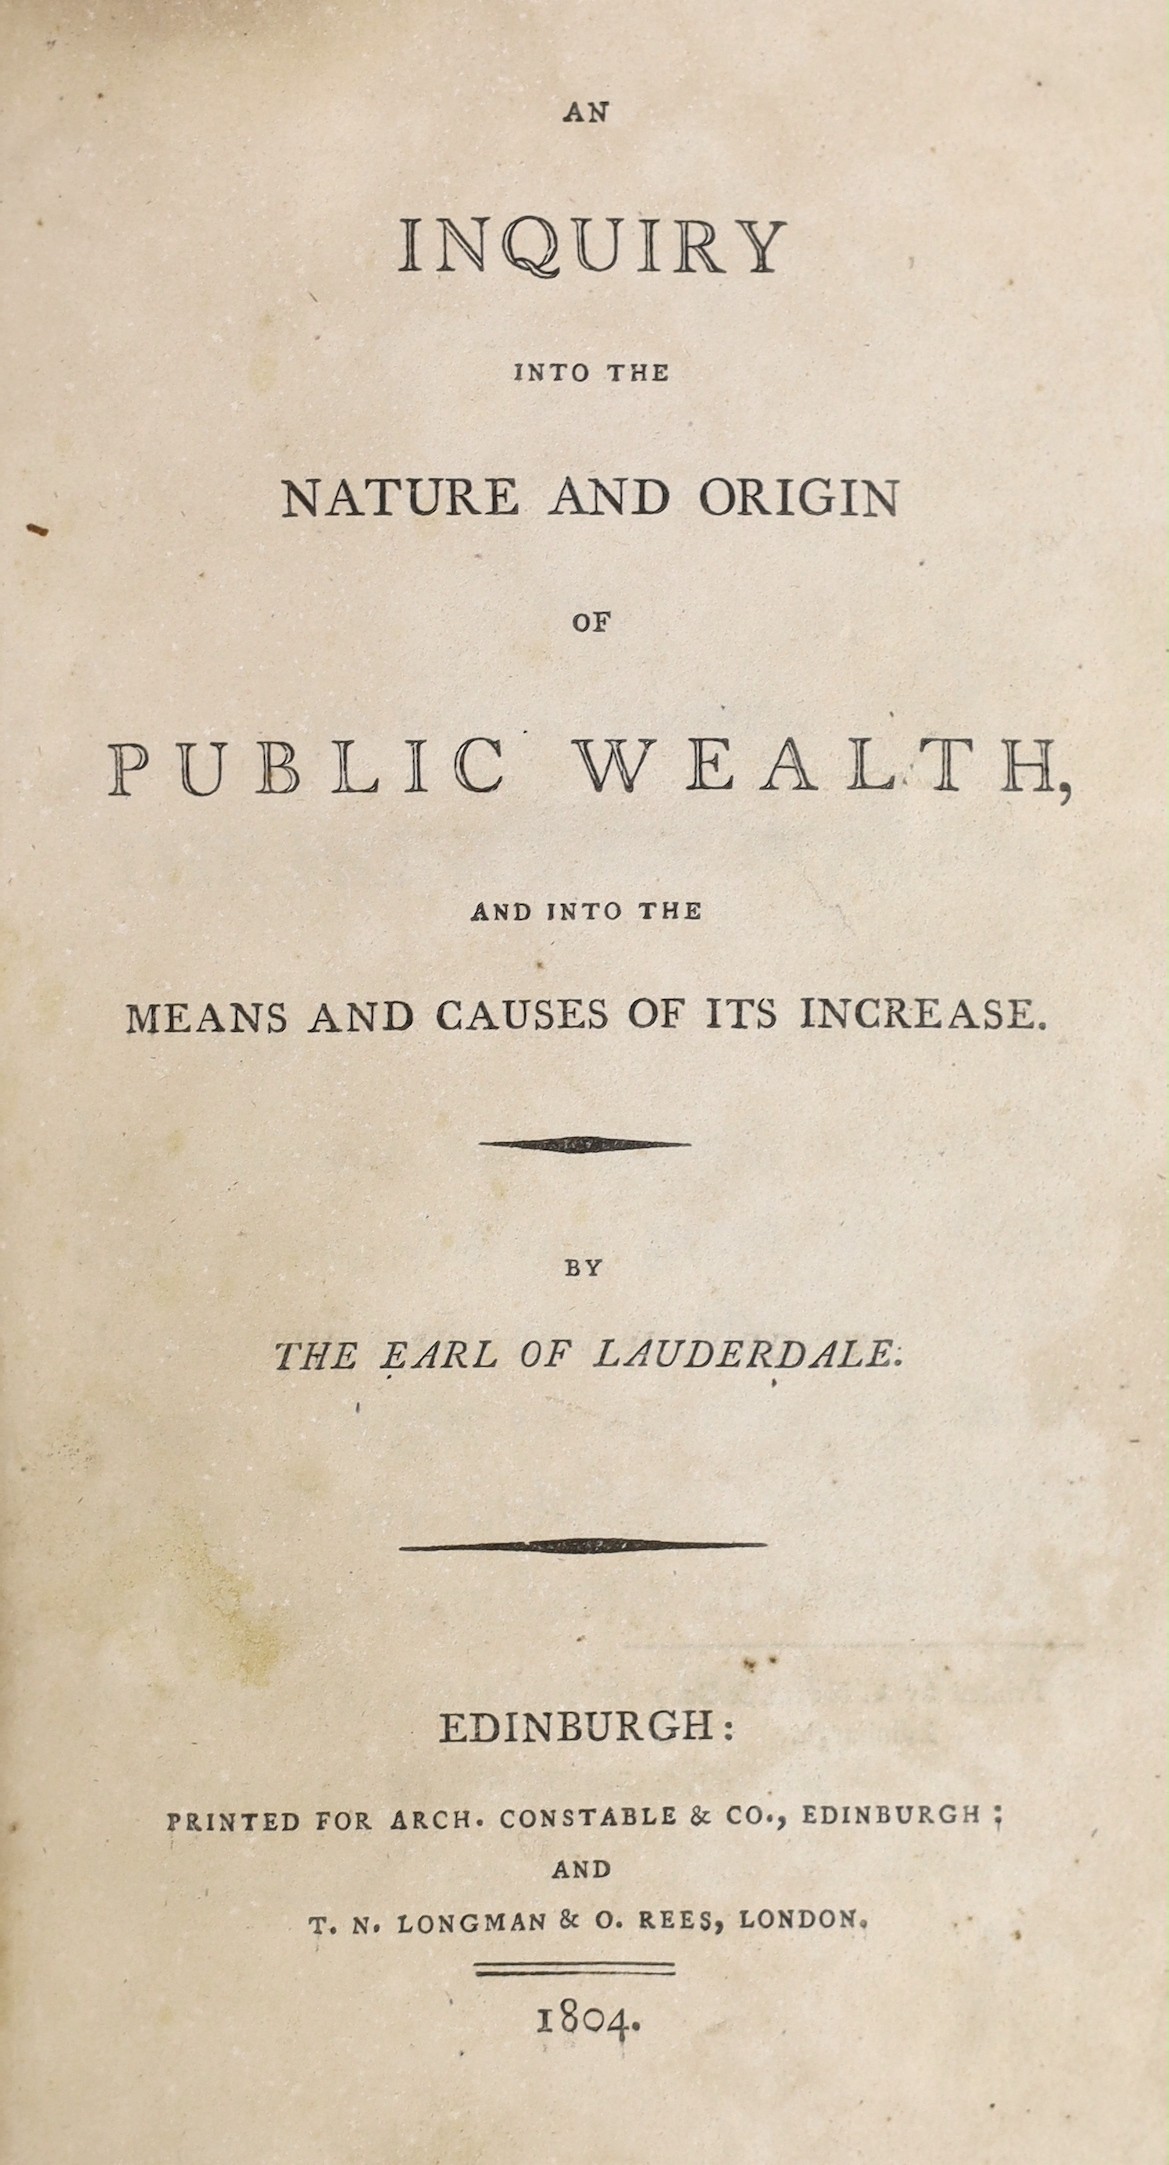 Maitland, James (Earl of Lauderdale) - An Inquiry into the Nature and Origin of Public Wealth, and into the means of its increase. First Edition.